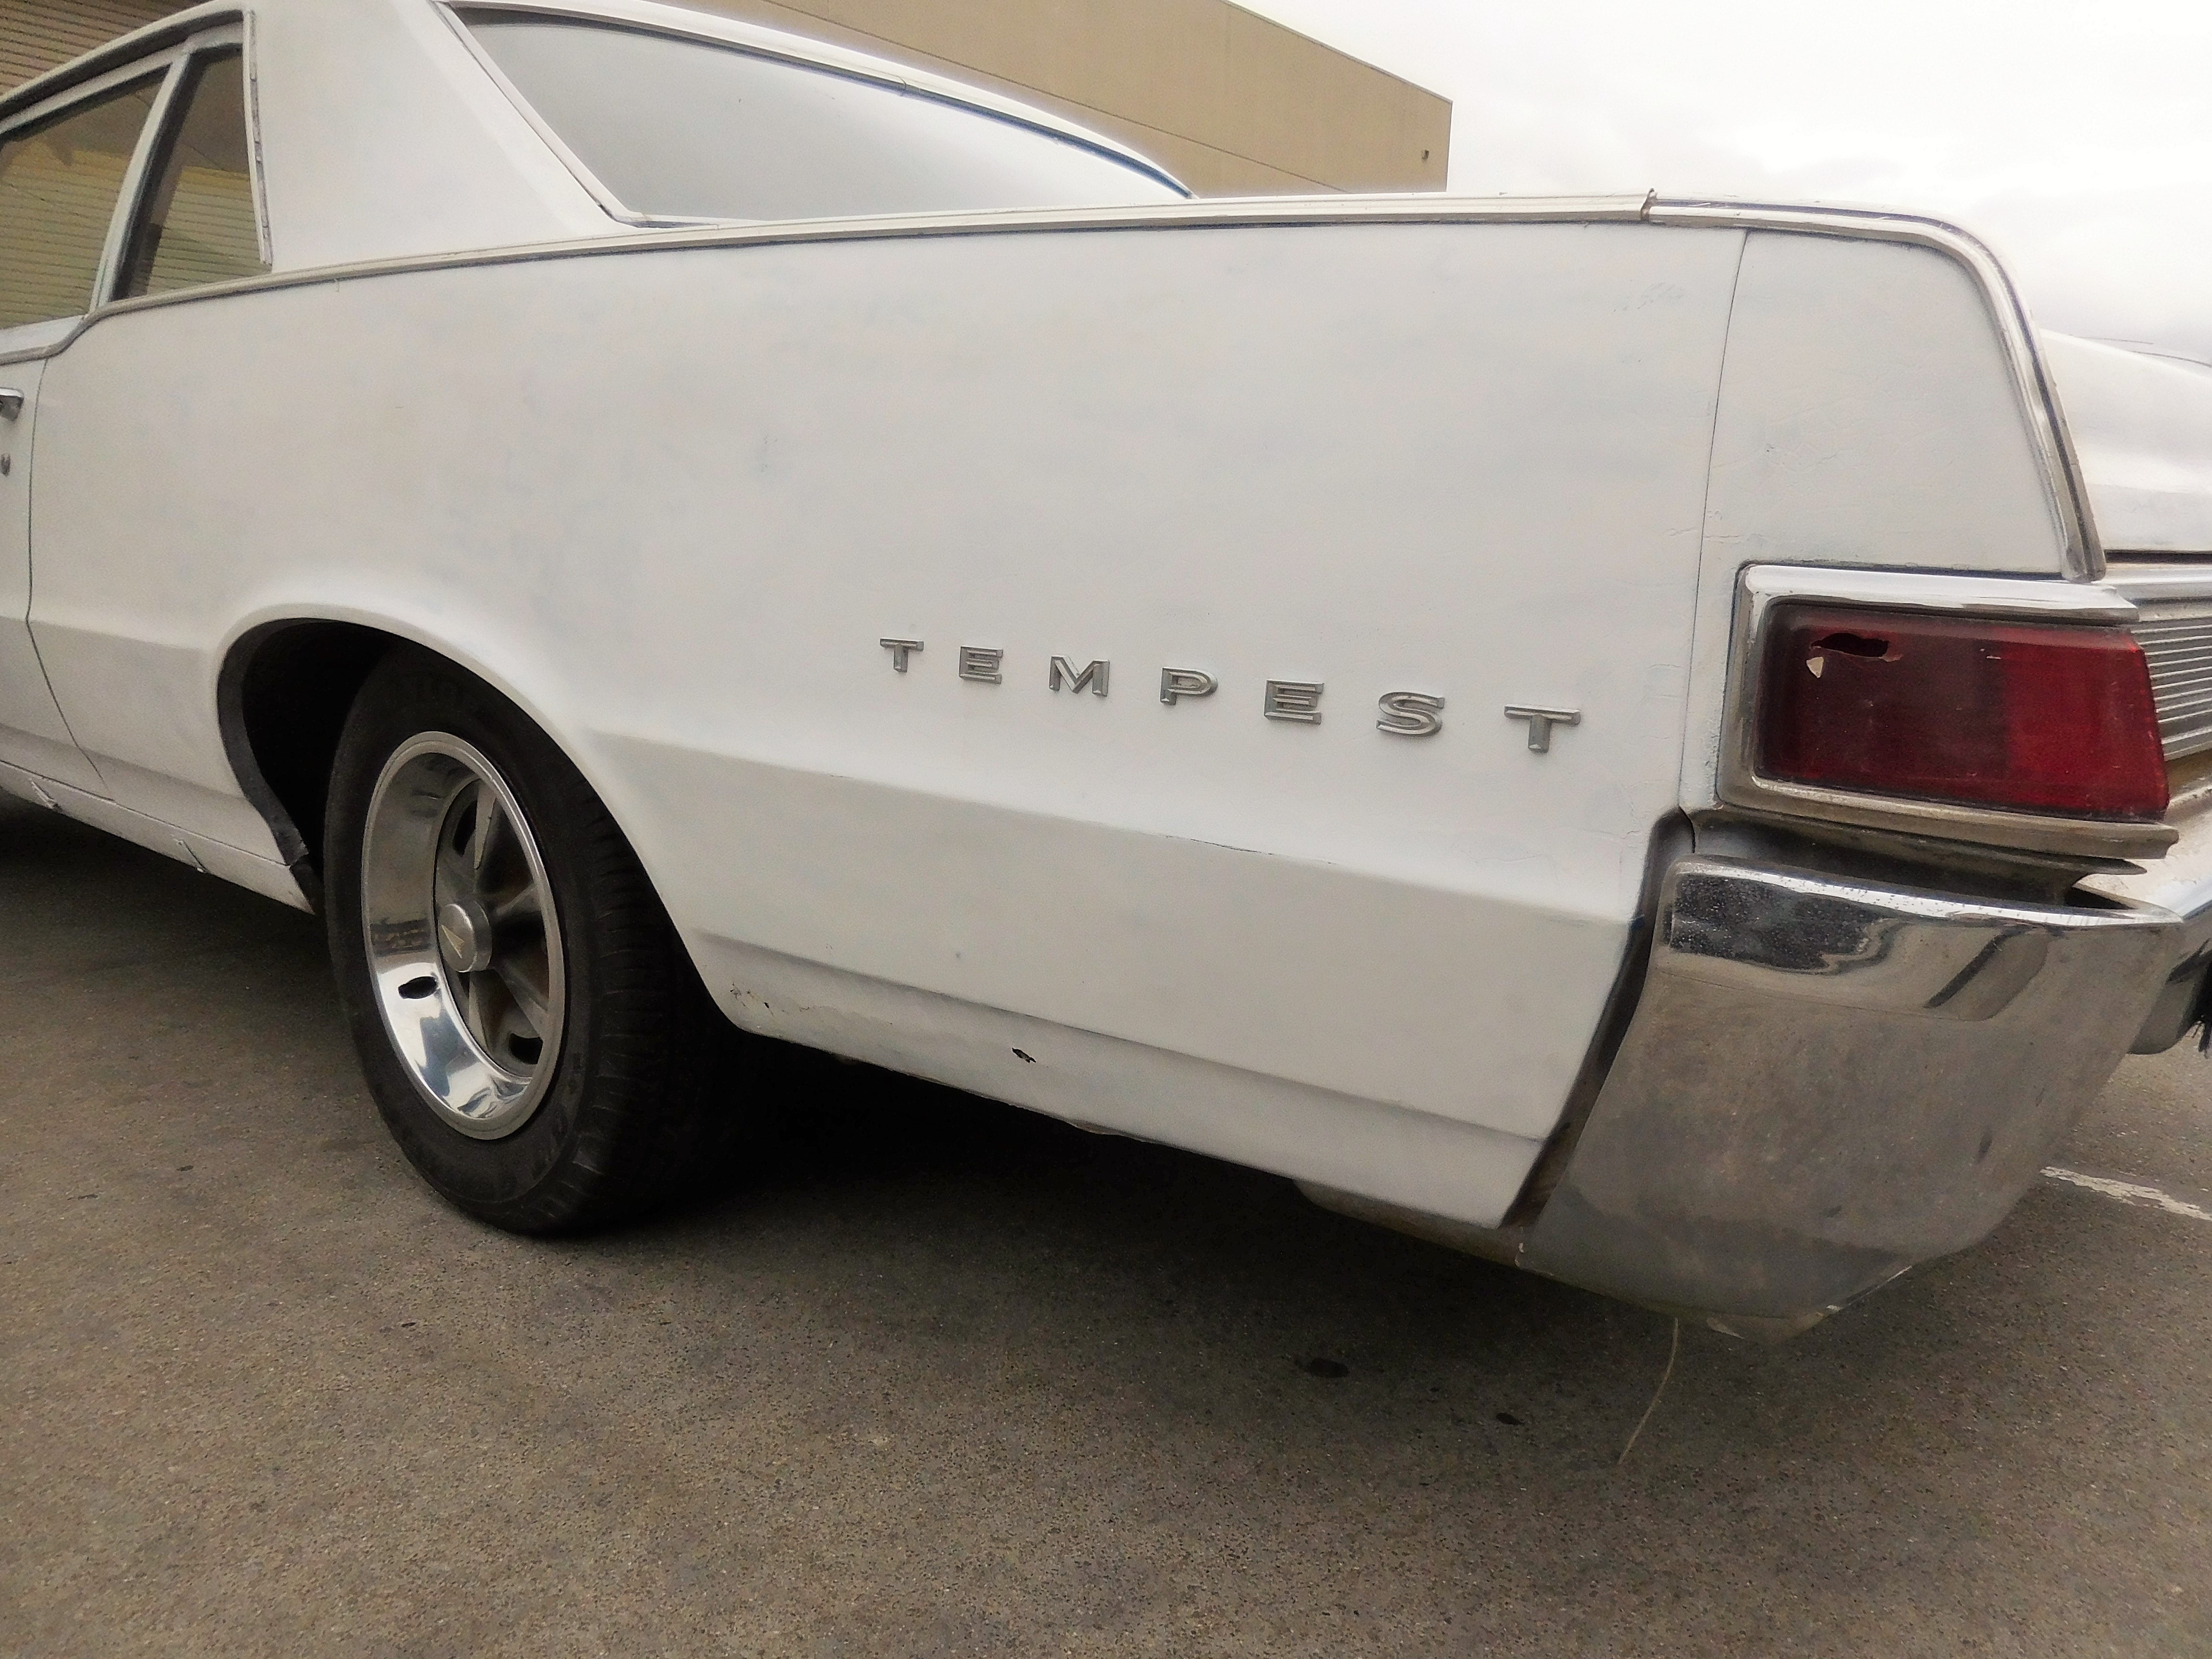 1965, Pontiac, Tempest, Solid, Rolling, Shell,project,car for sale, cars for sale, cars, car, for,sale,